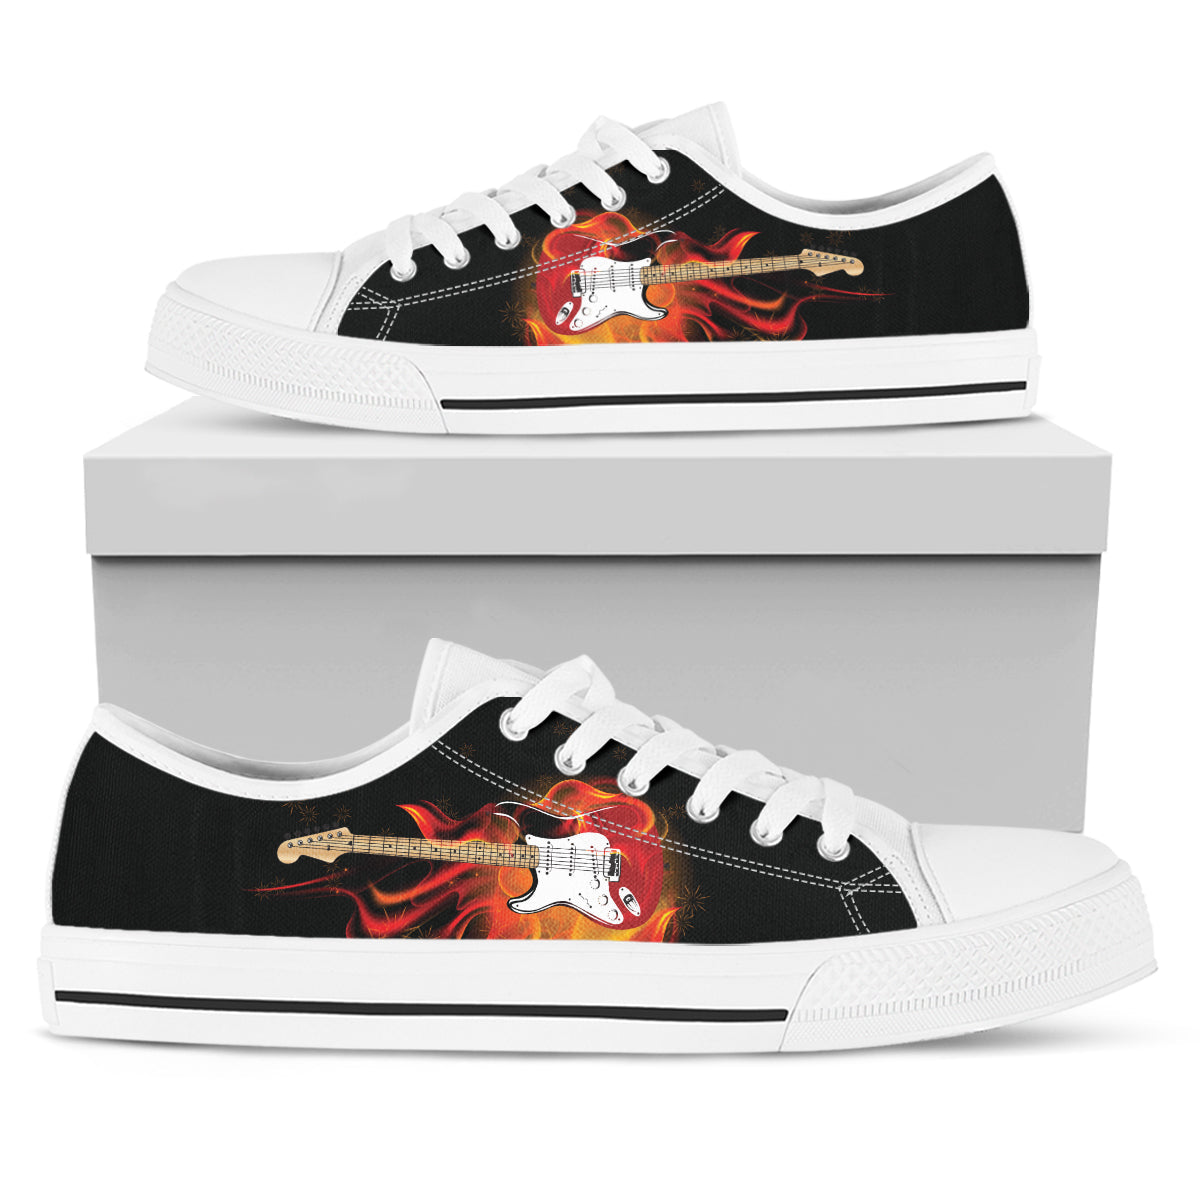 Electric Guitar on Fire Canvas Shoes